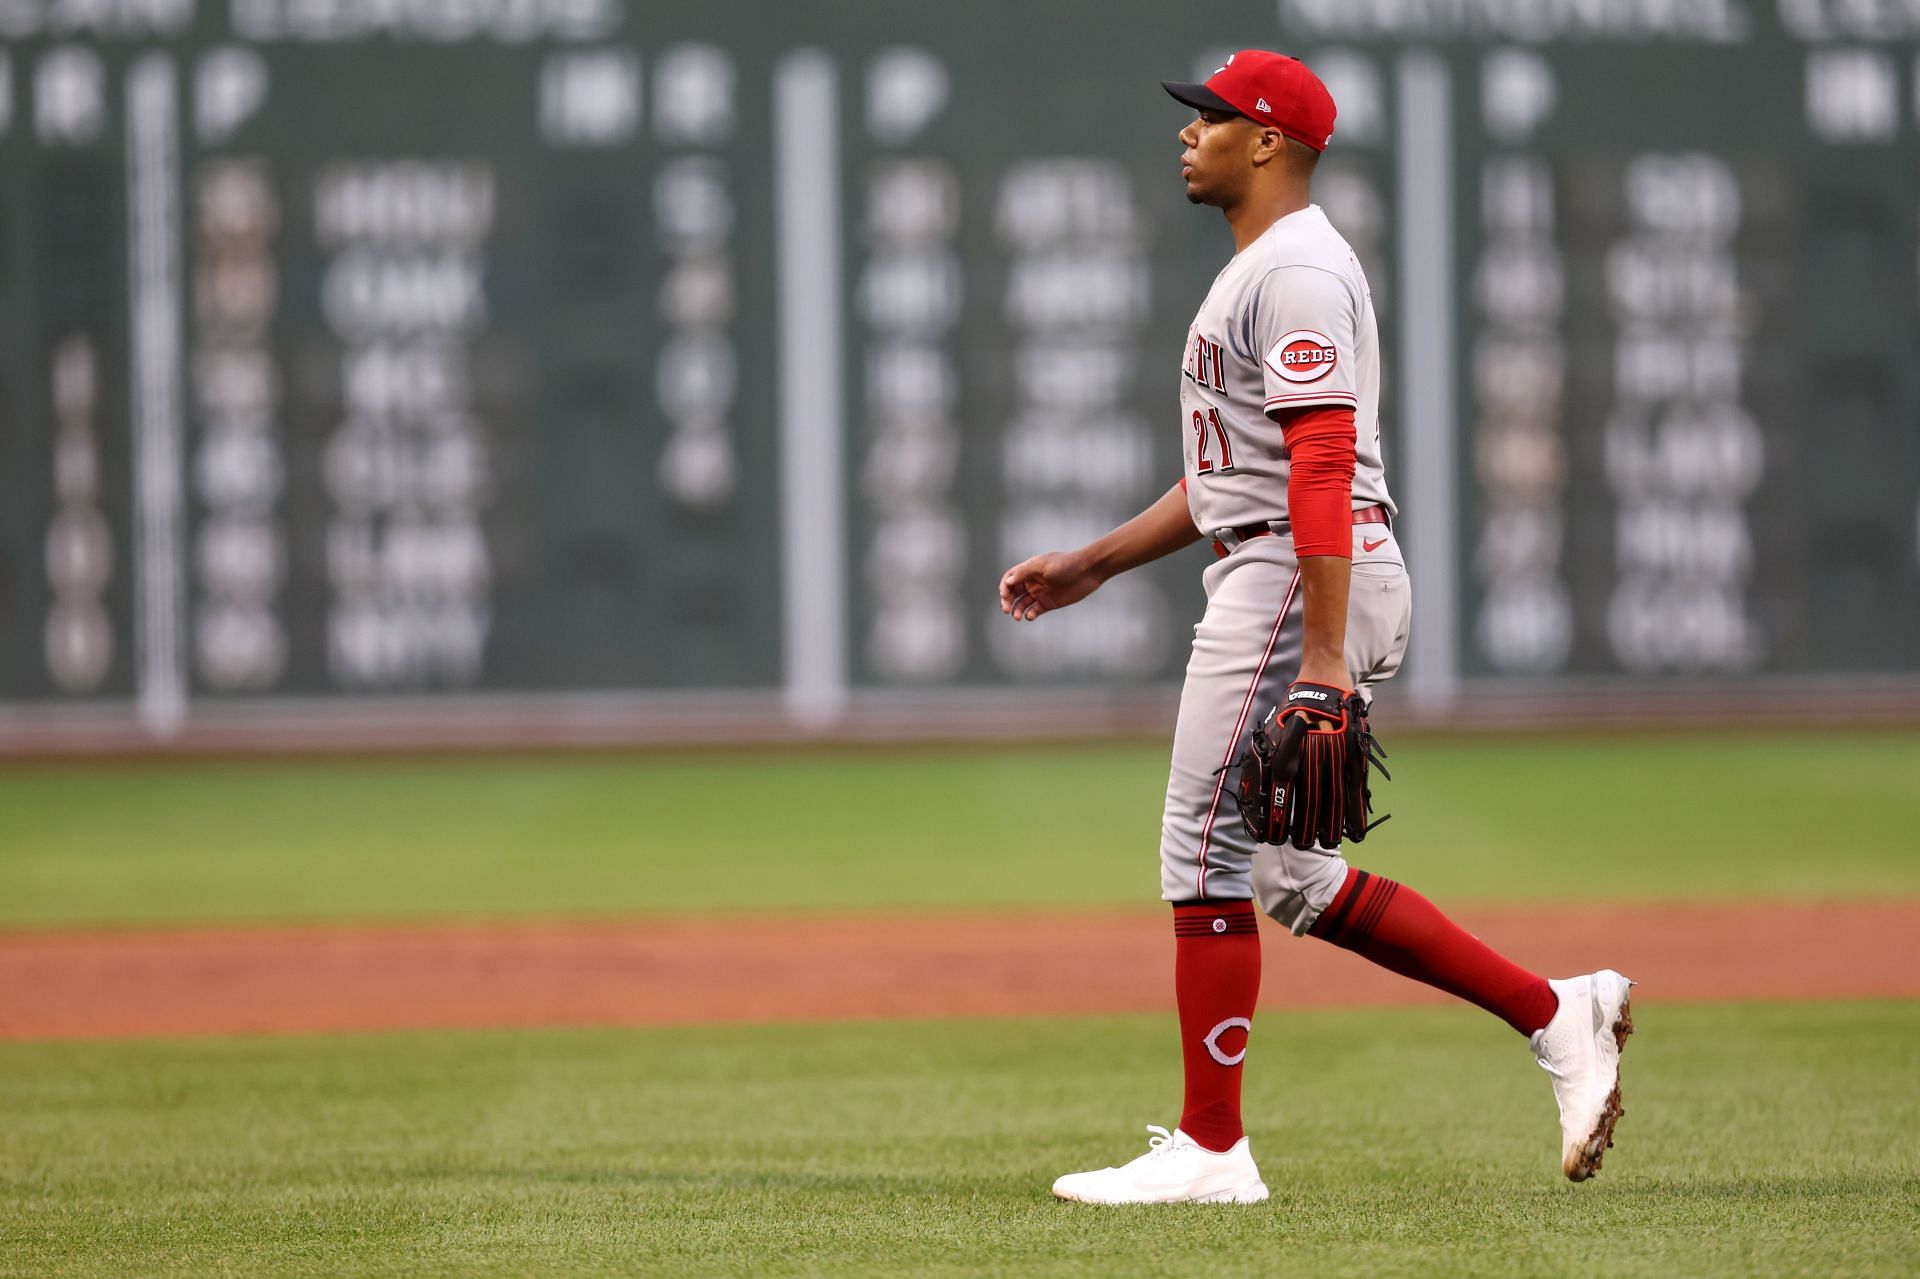 Yankees blow ninth-inning lead, lose to Reds